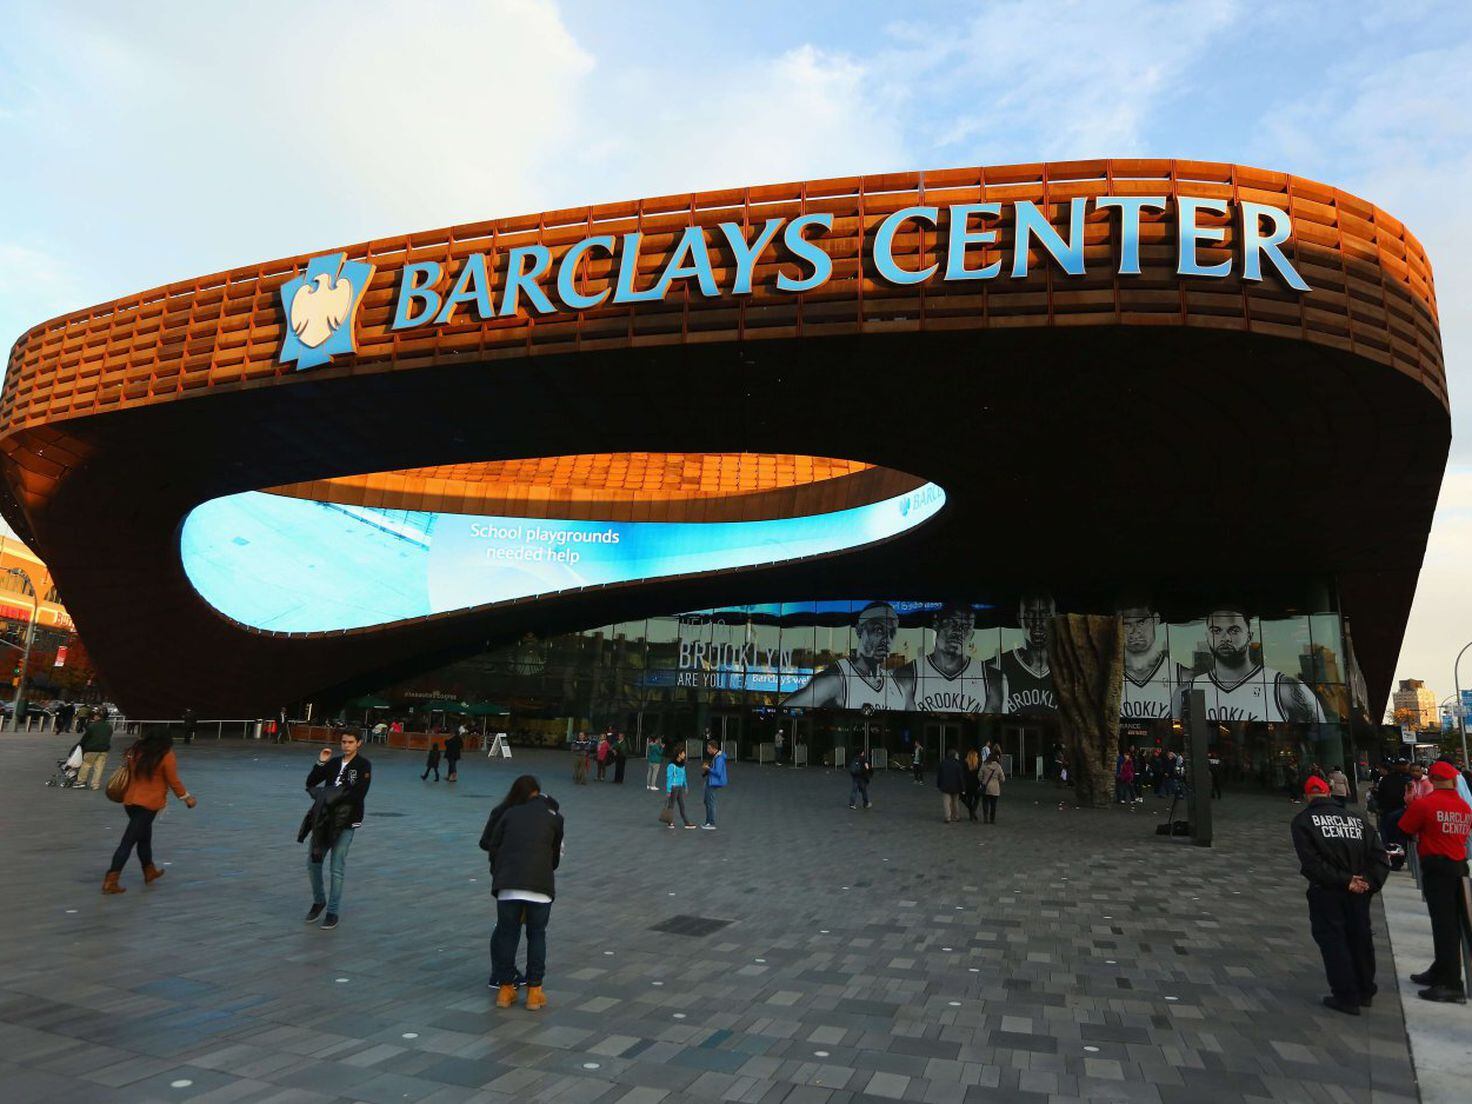 All-Star Season comes to Brooklyn, Barclays Center